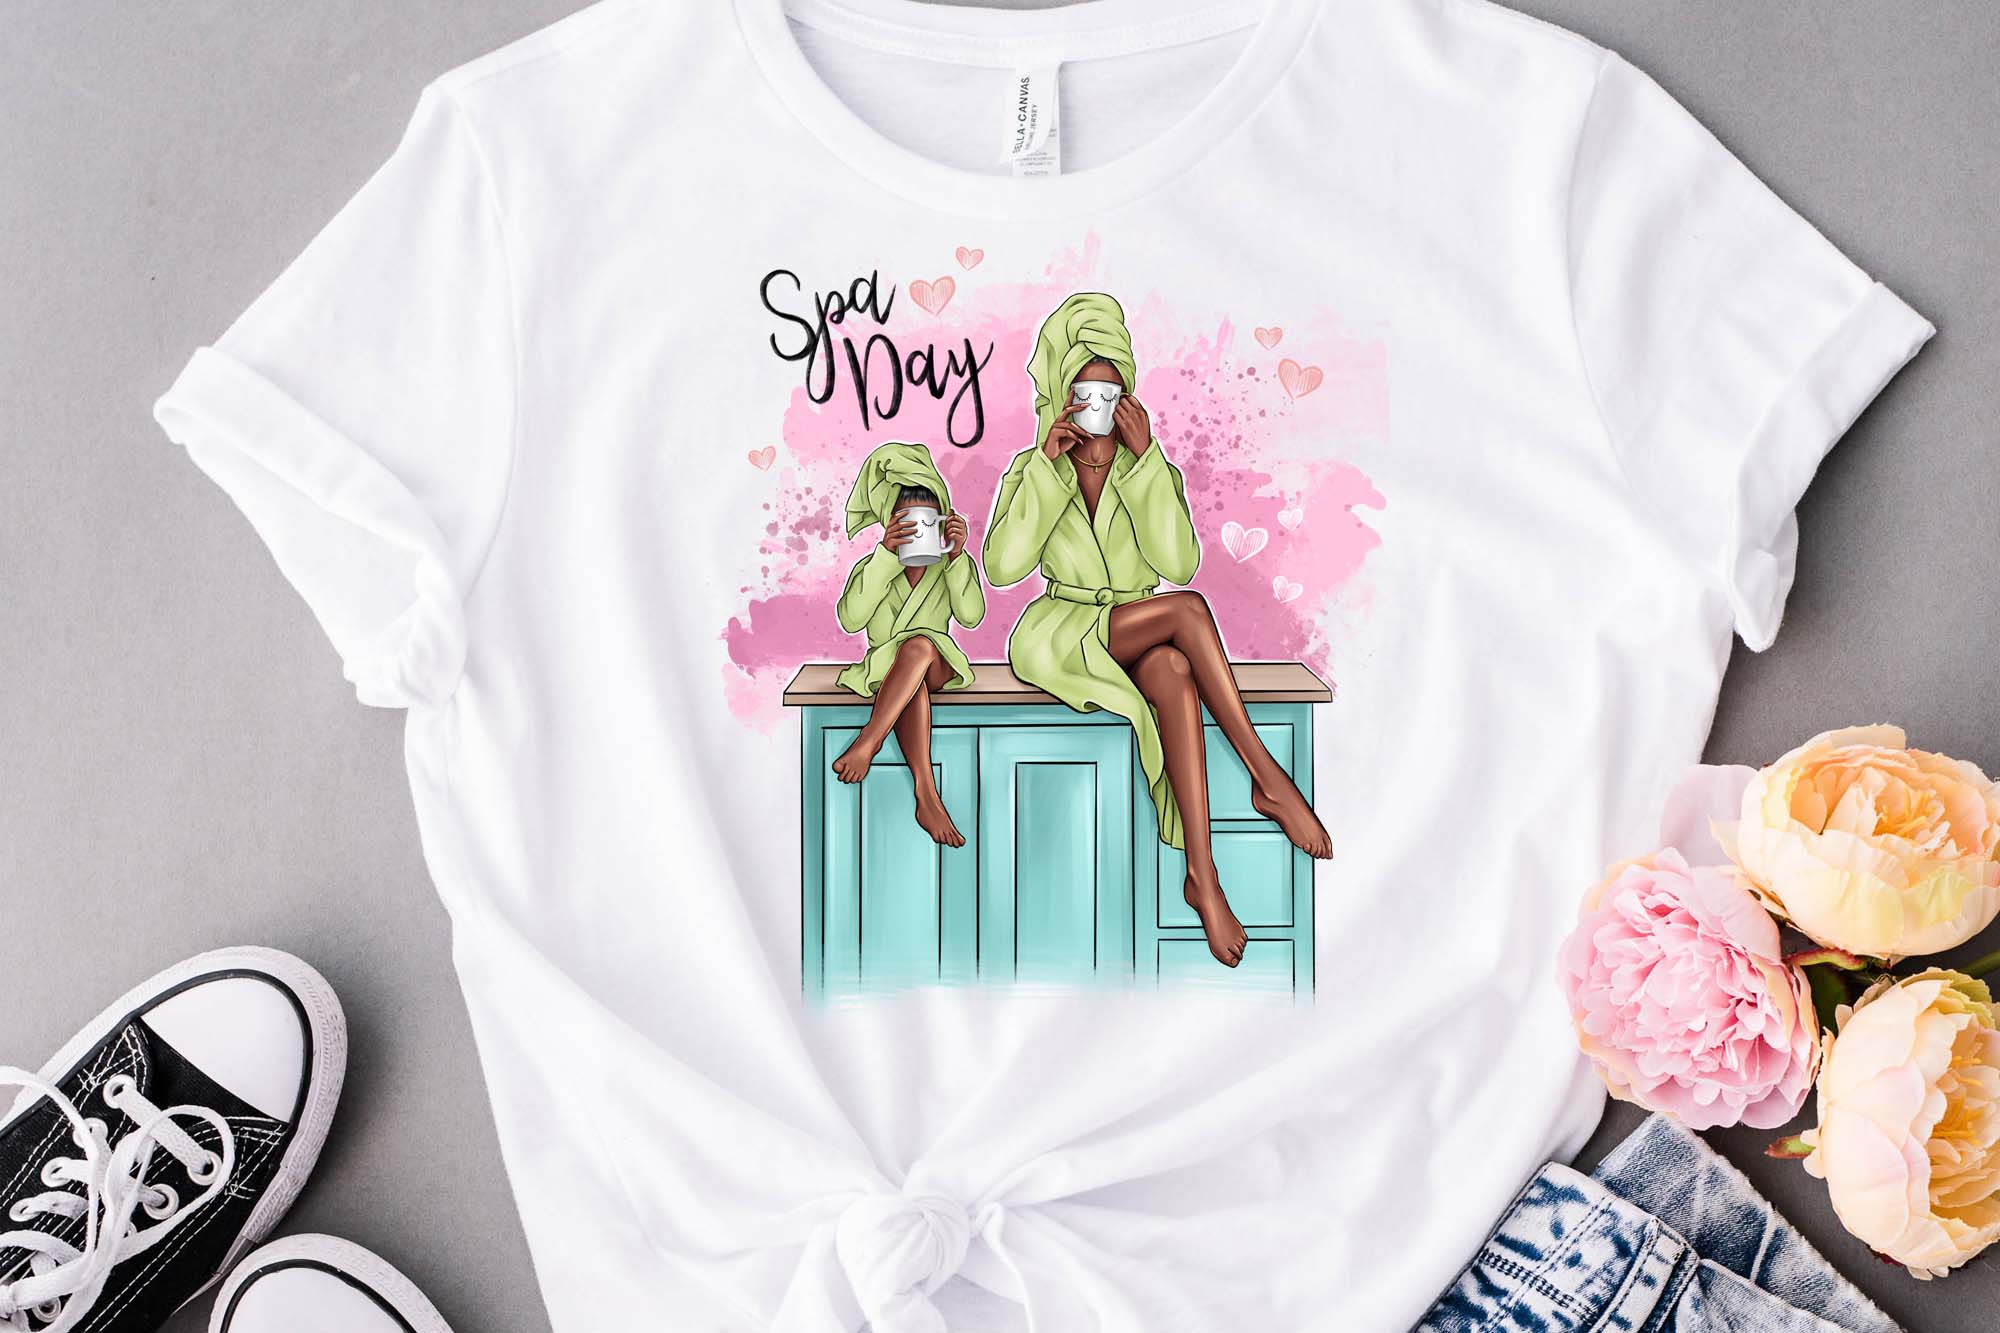 Mom And Daughter At The SPA T-shirt Print Example.